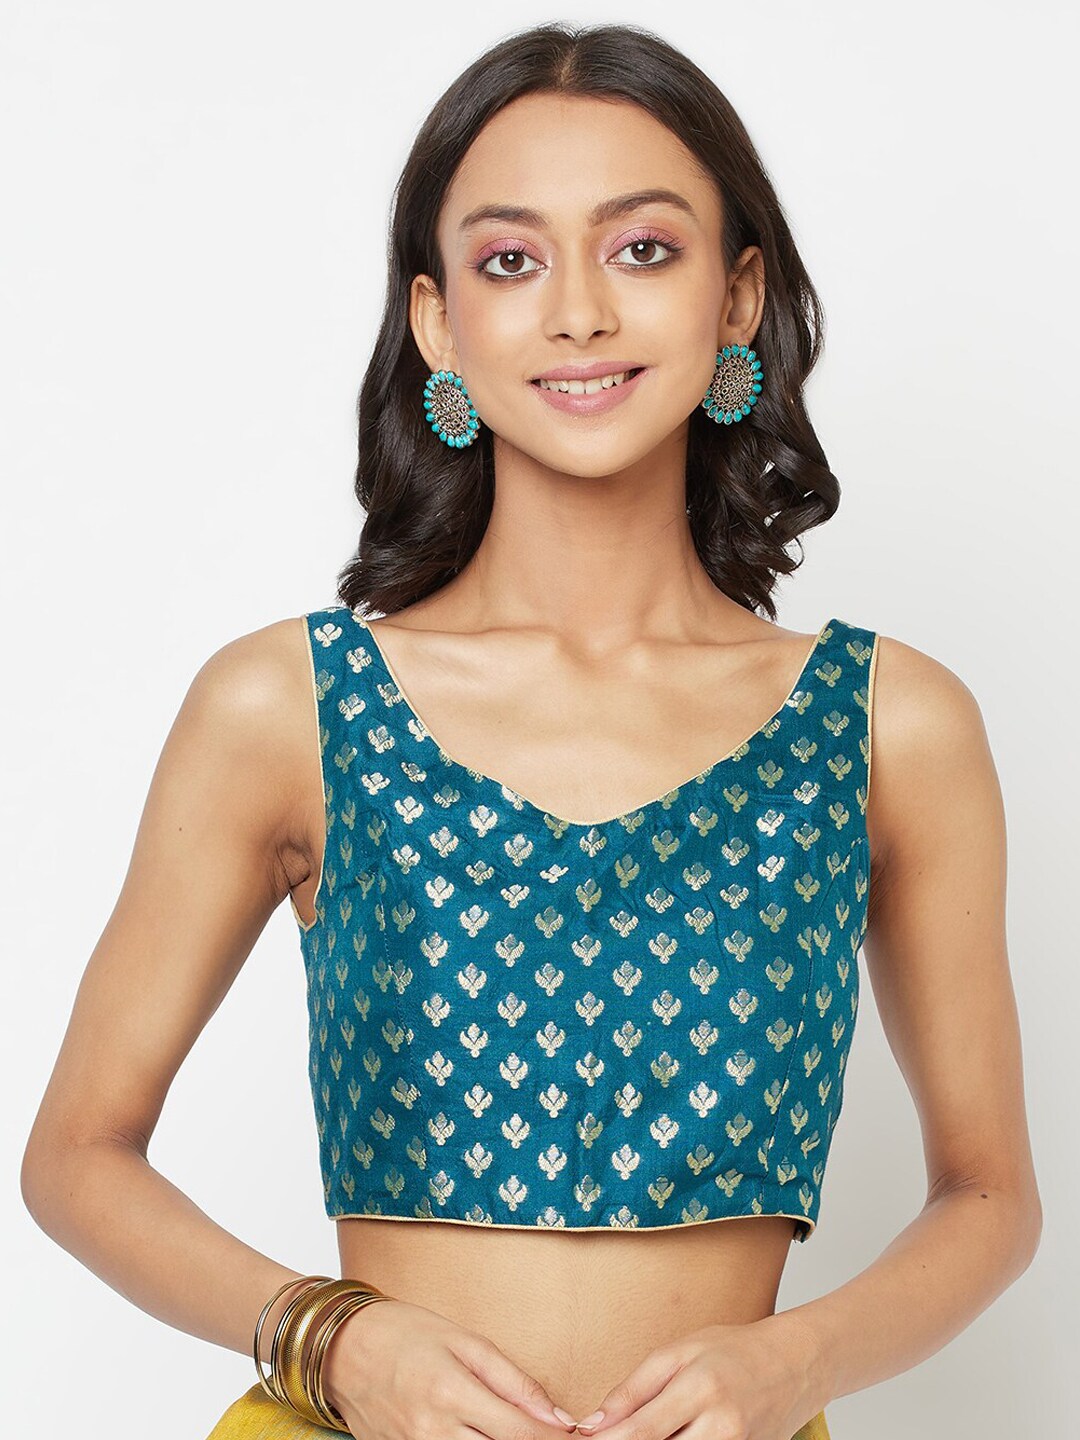 Fabindia Turquoise Blue & Silver-Coloured Woven Saree Blouse Price in India